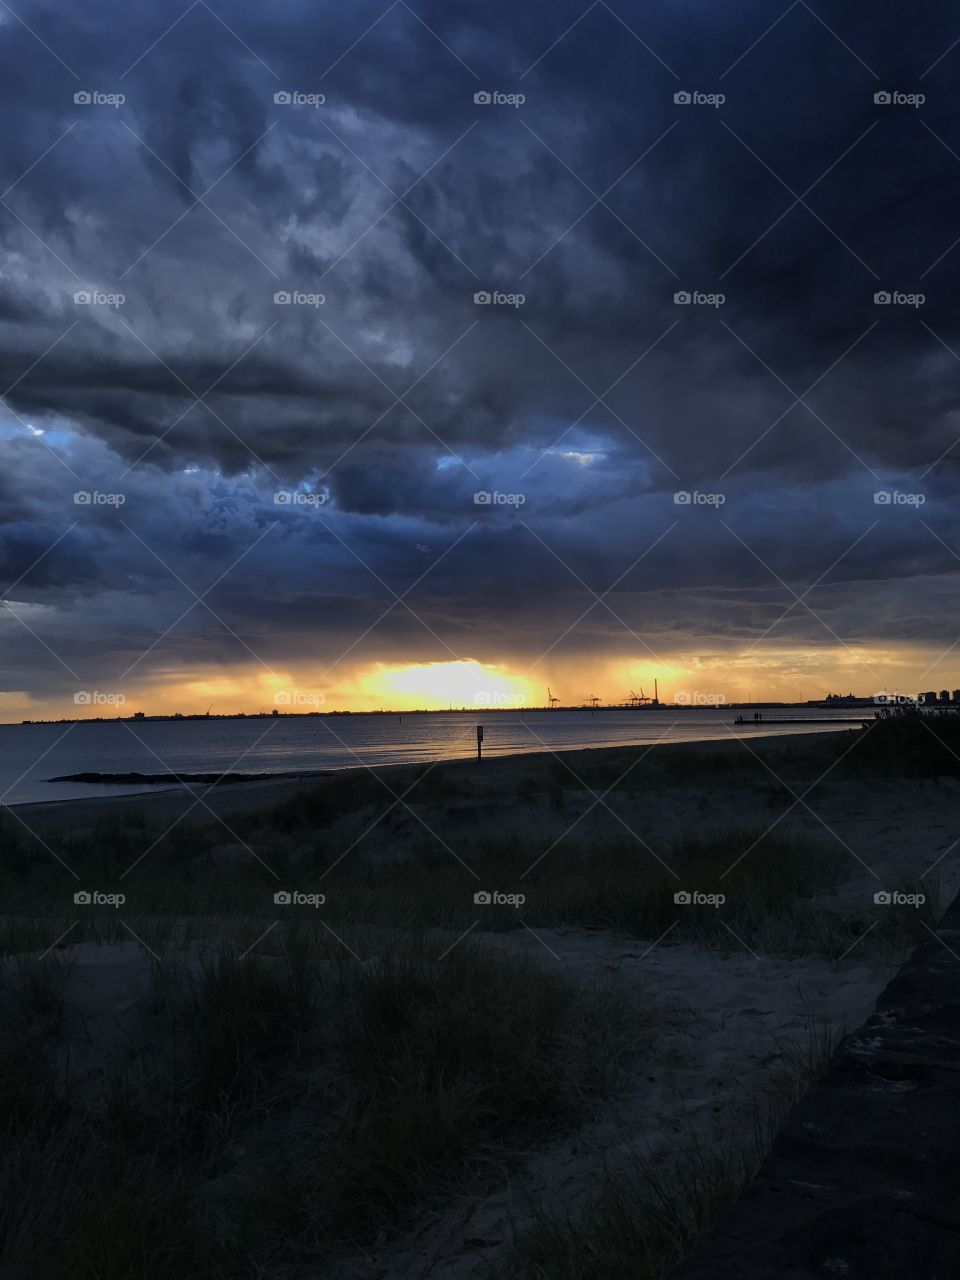 Dark cloudy sky during sunset and storm, on the beach 